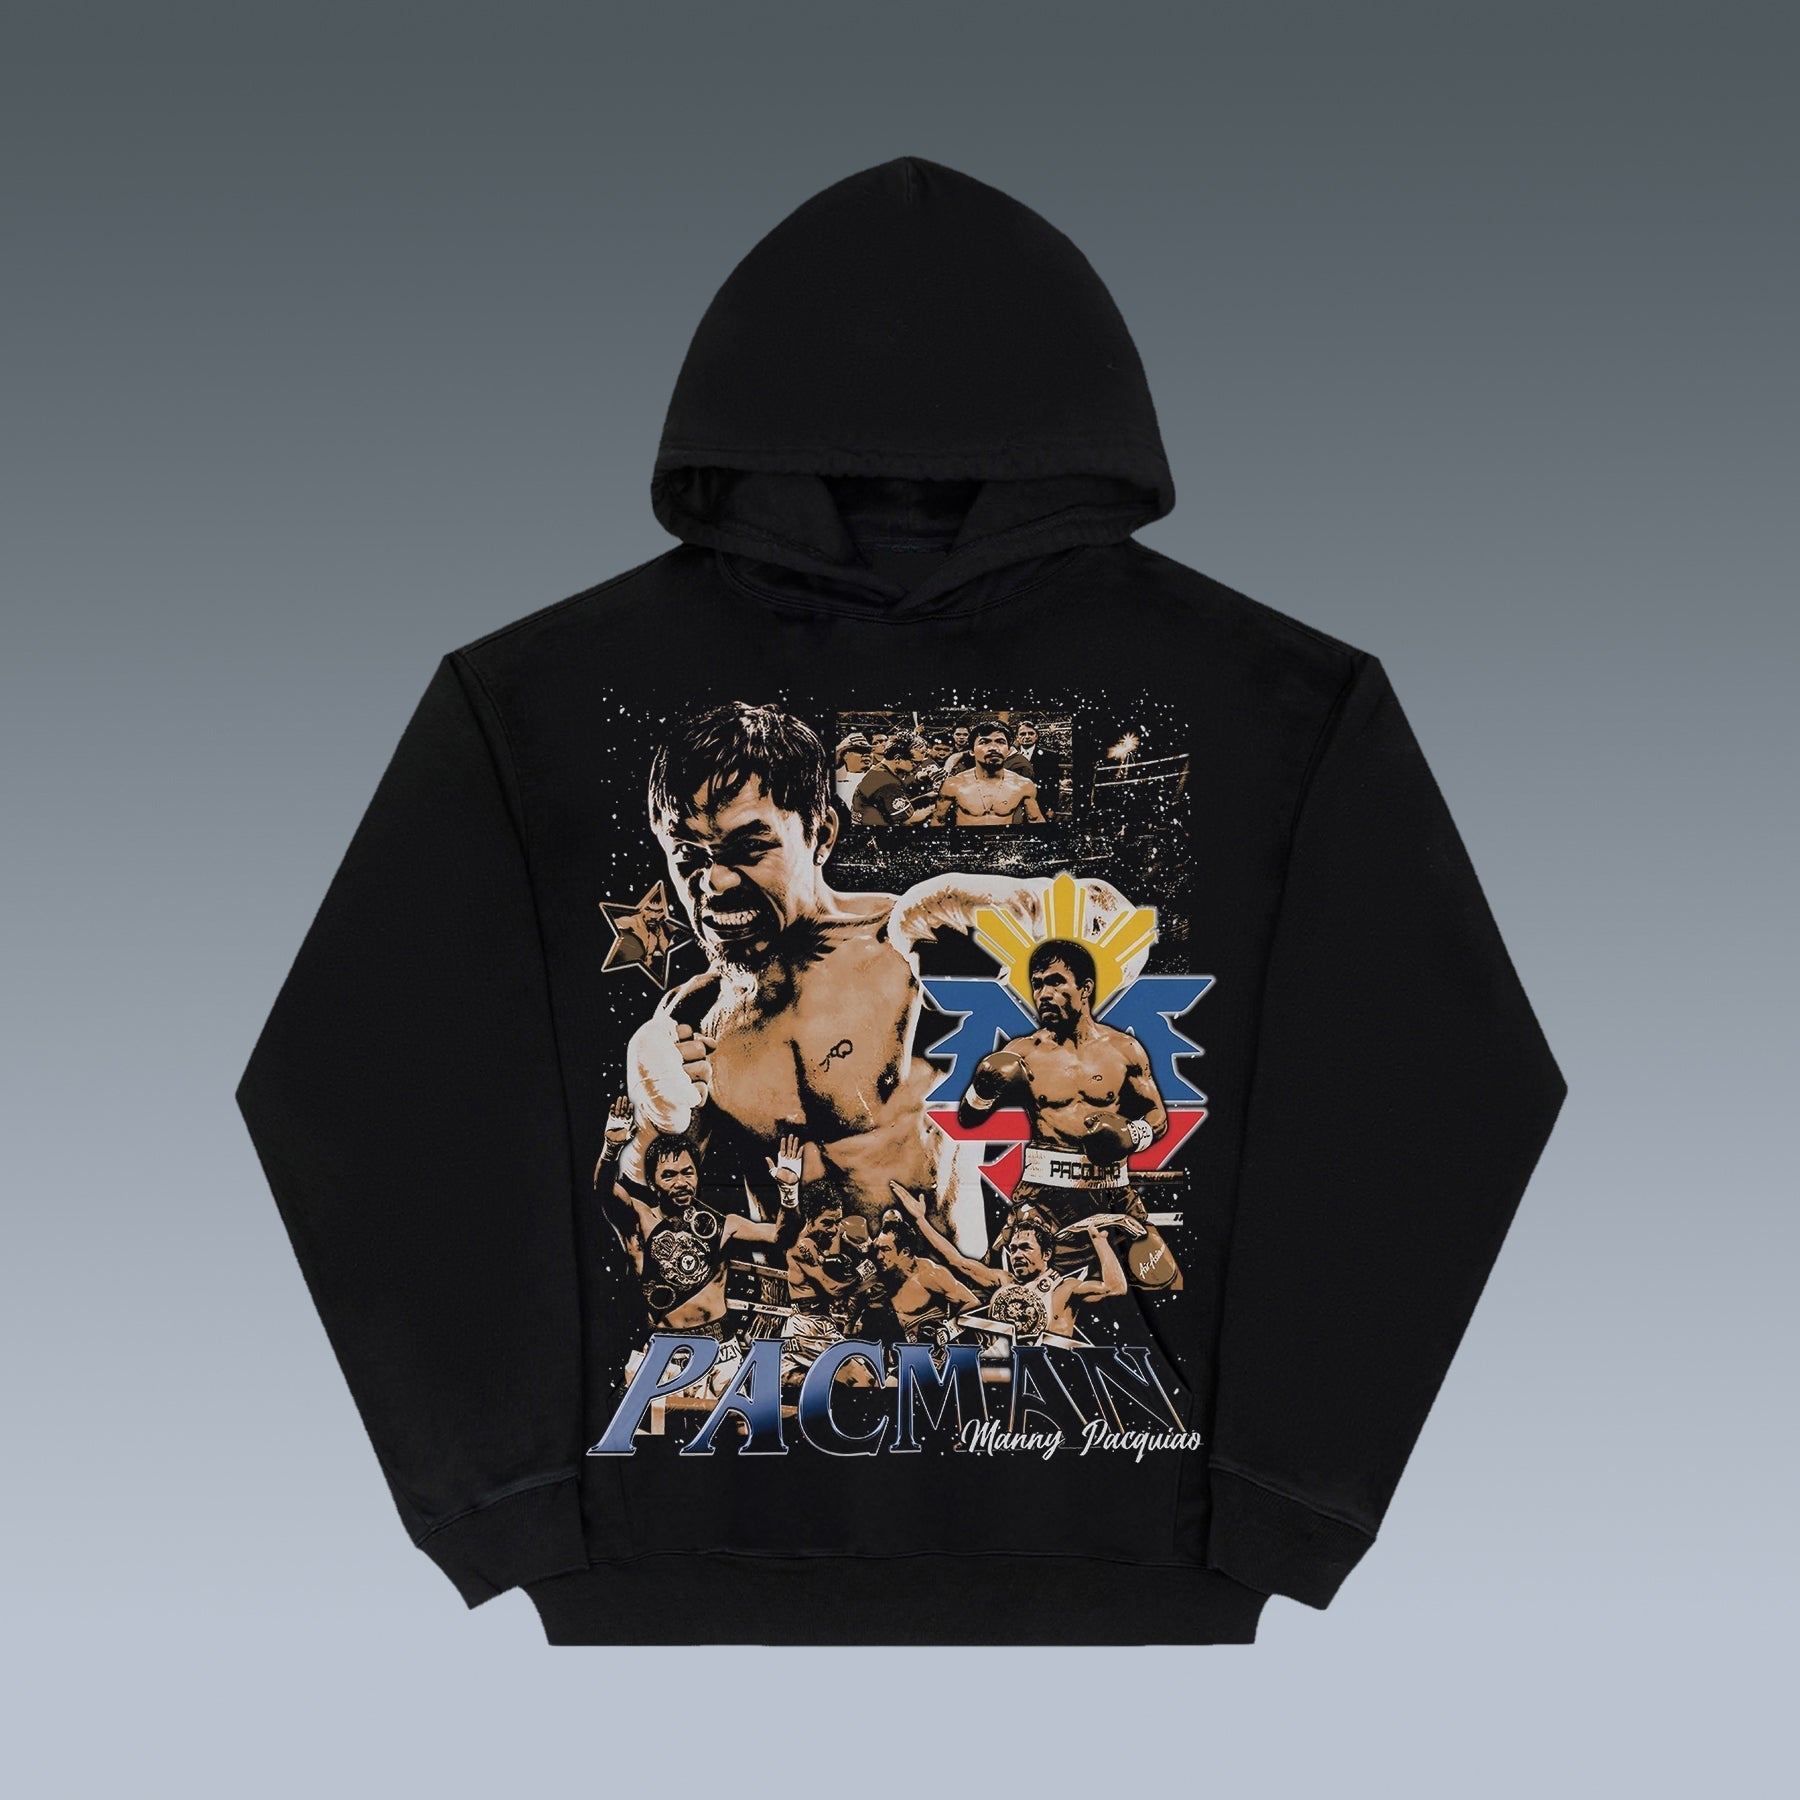 VINTAGE HOODIES | MANNY PACQUIAO